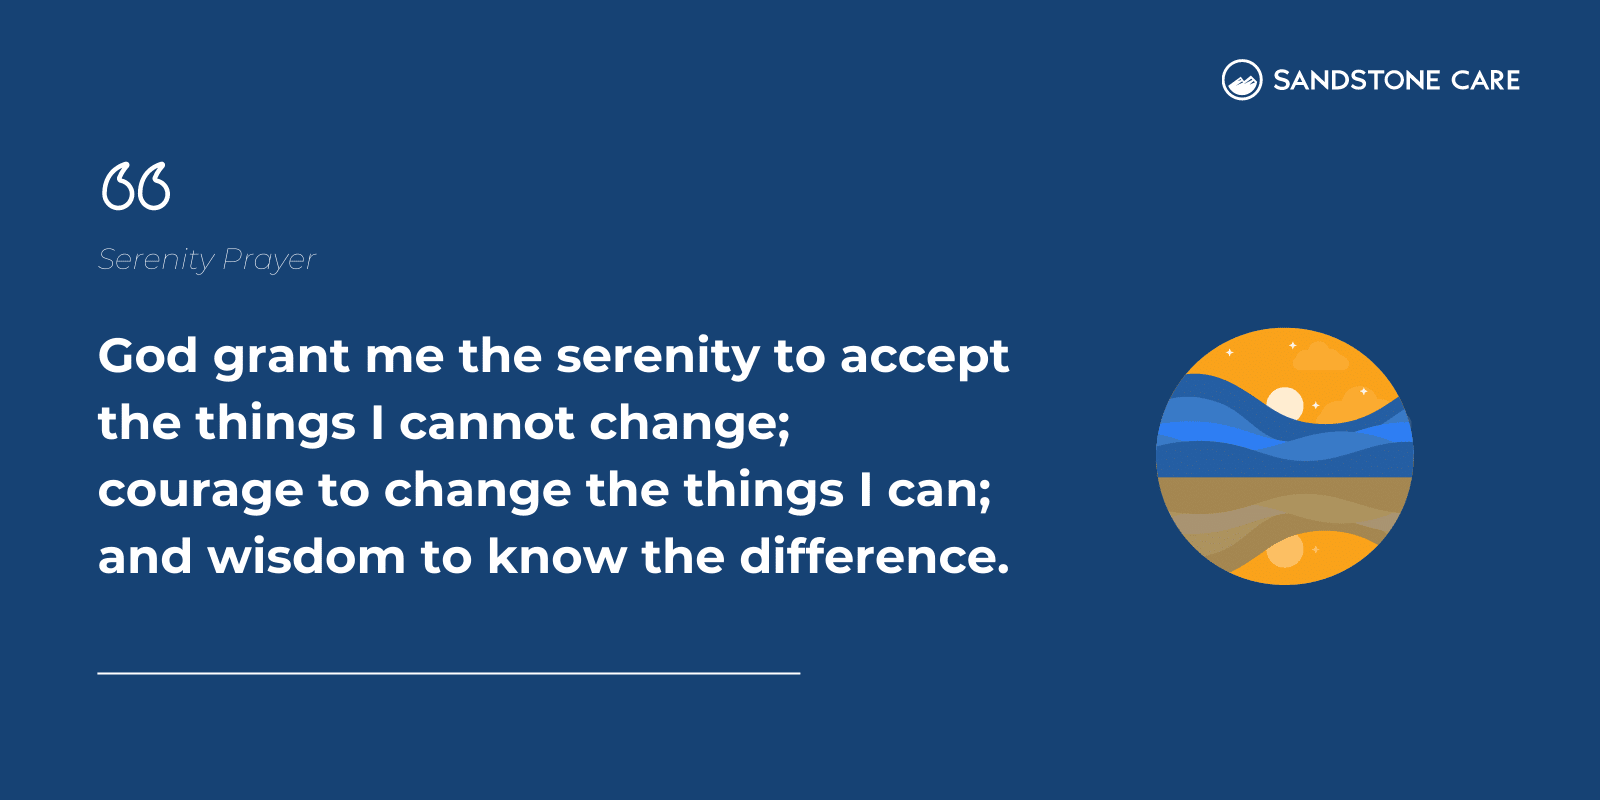 Serenity Prayer written on a navy background and a circular digital graphic of serene nature next to the prayer.